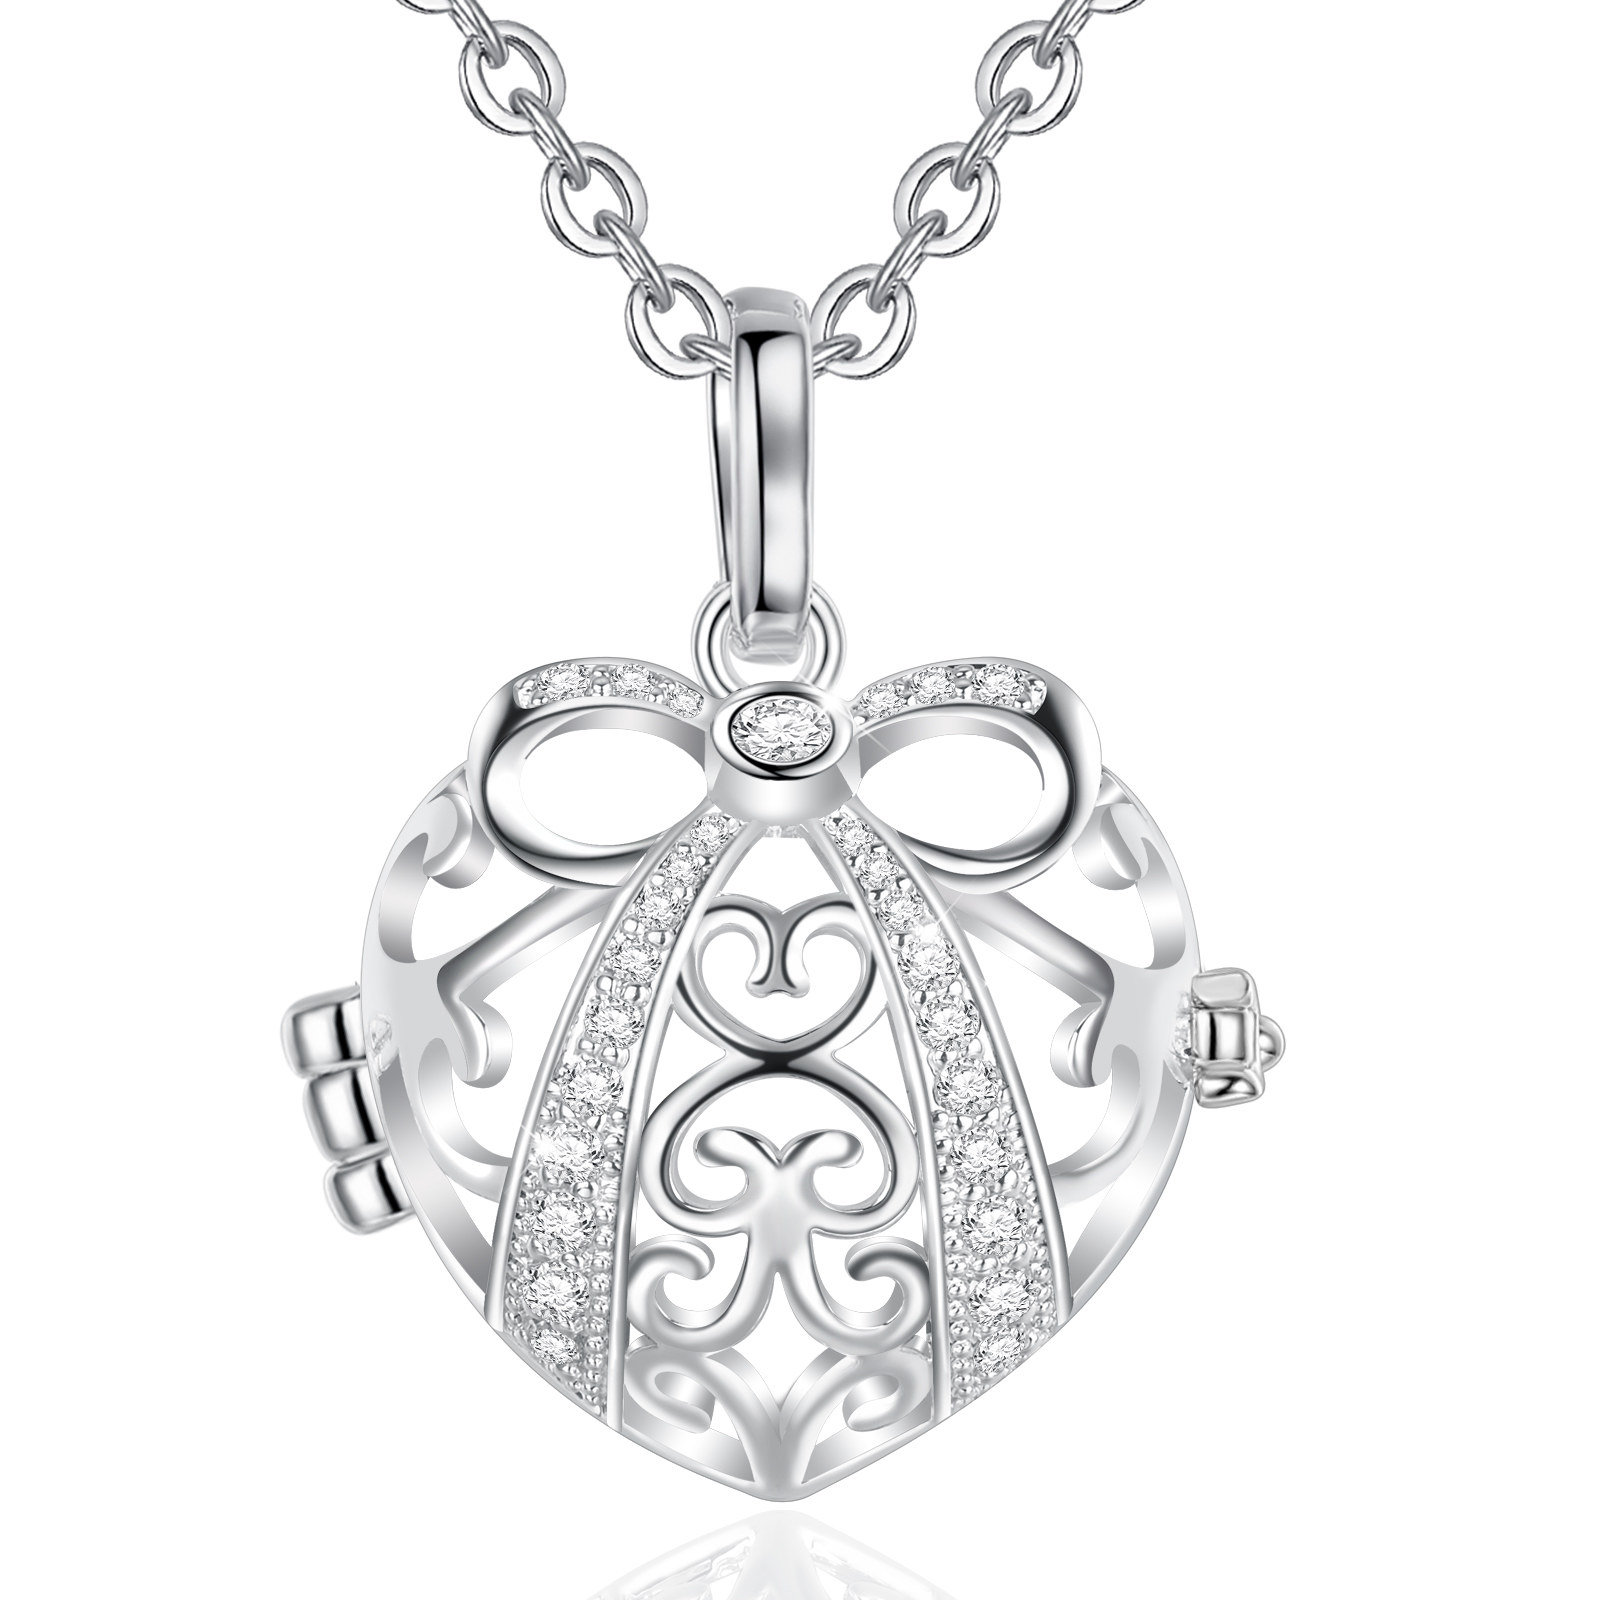 Merryshine Jewelry Bow Pattern Design Heart Harmony Chime Ball Bell cage pendant necklace